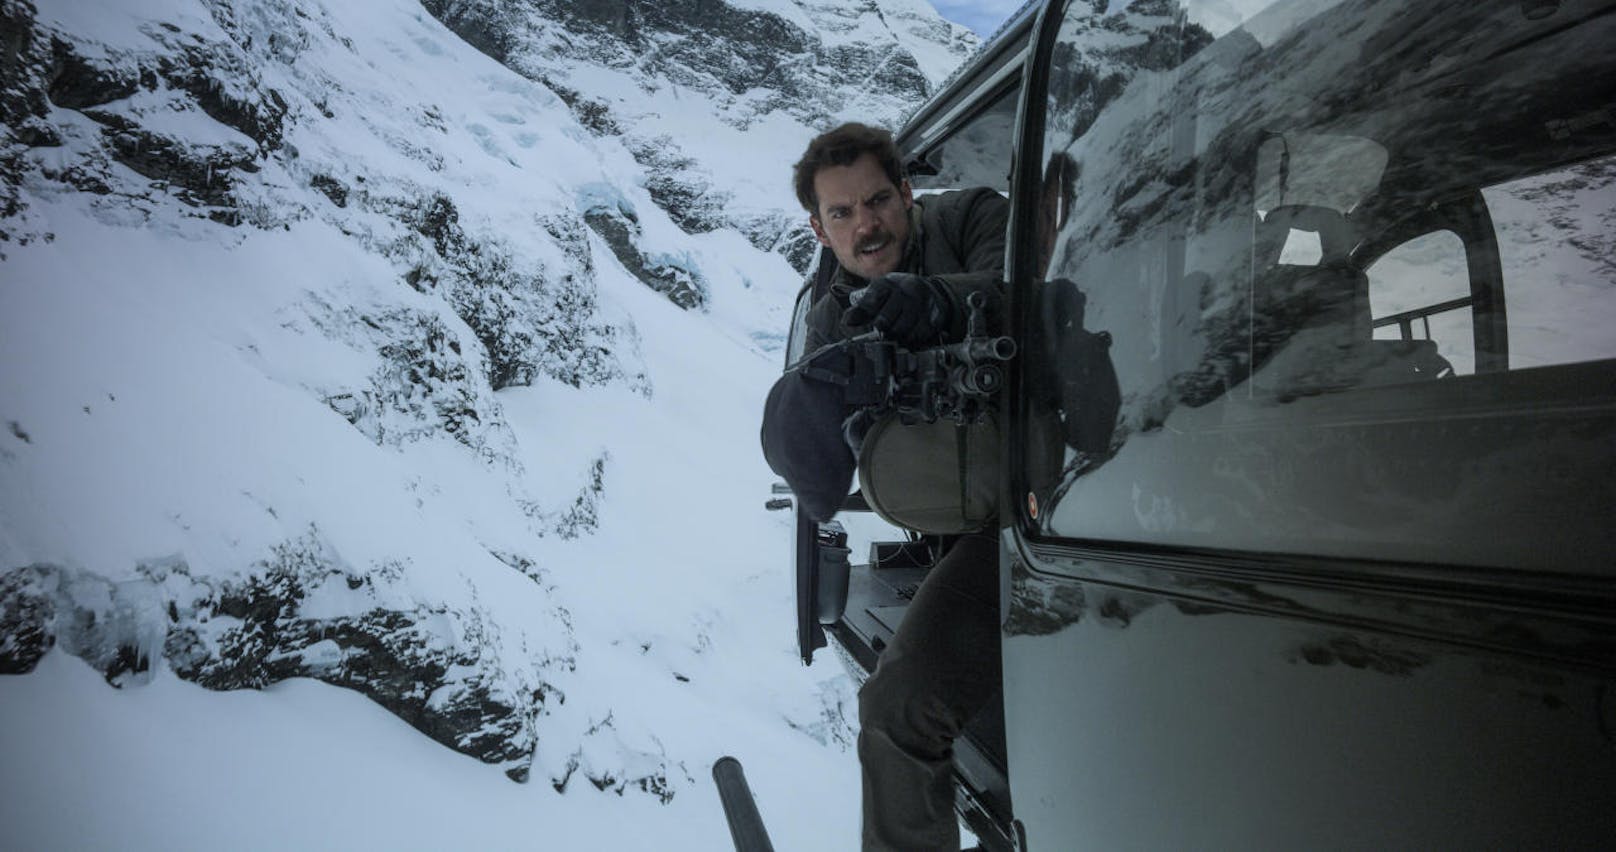 Henry Cavill in "Mission: Impossible - Fallout"